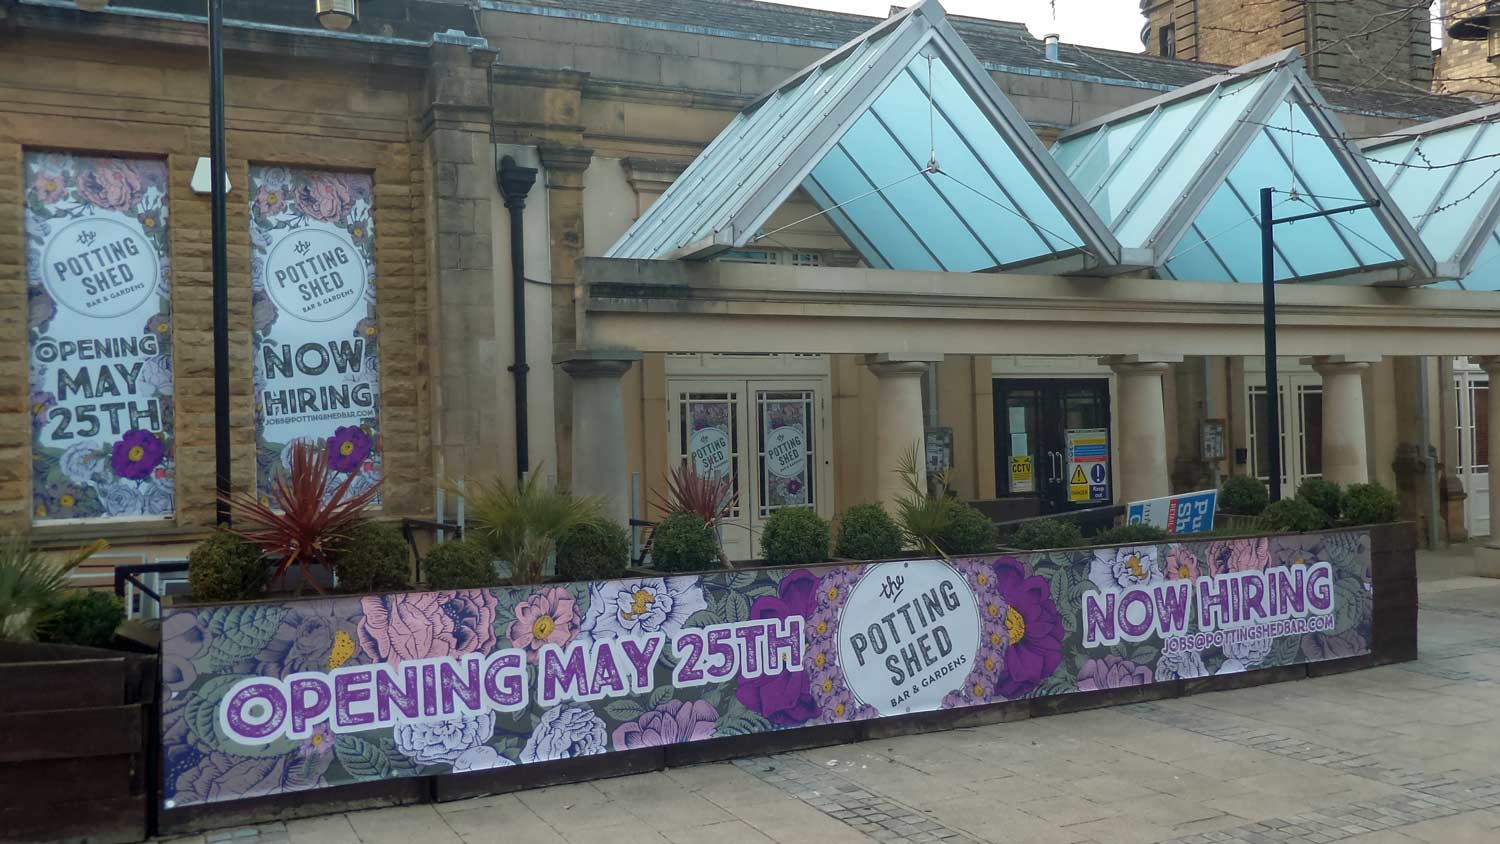 The Potting Shed Bar & Gardens is set to open this May in Harrogate